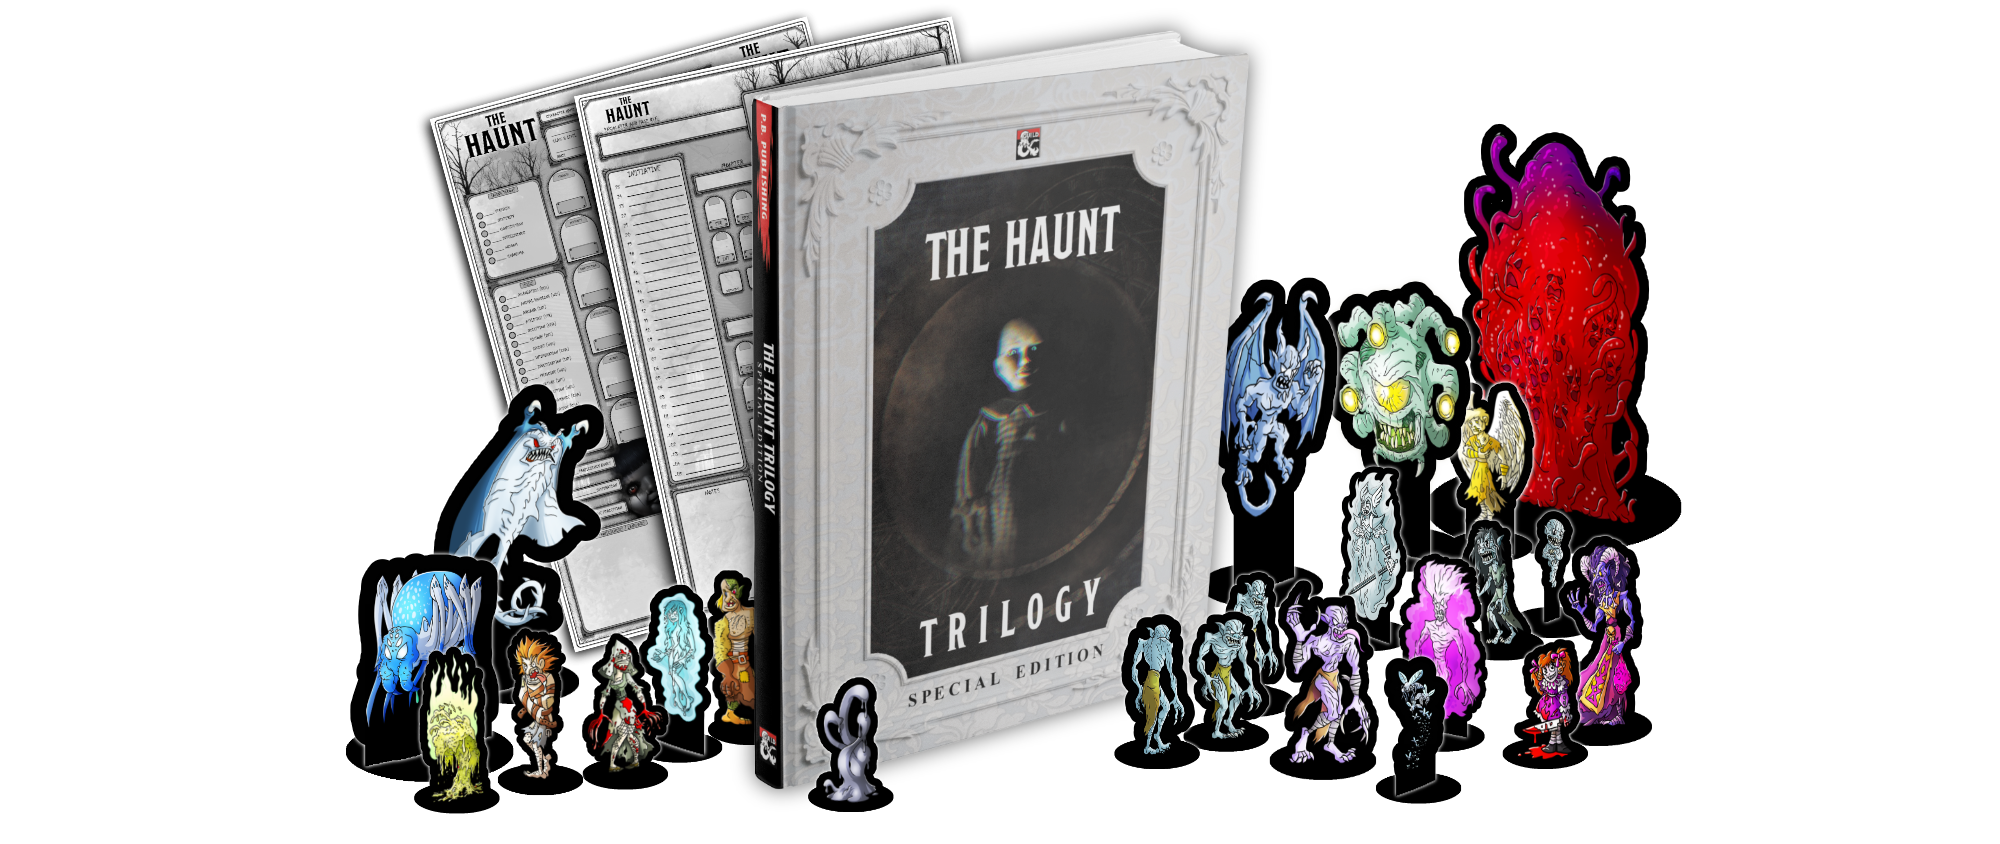 An image depicting the cover of the Haunt Trilogy book, character sheets and paper minis of monsters.